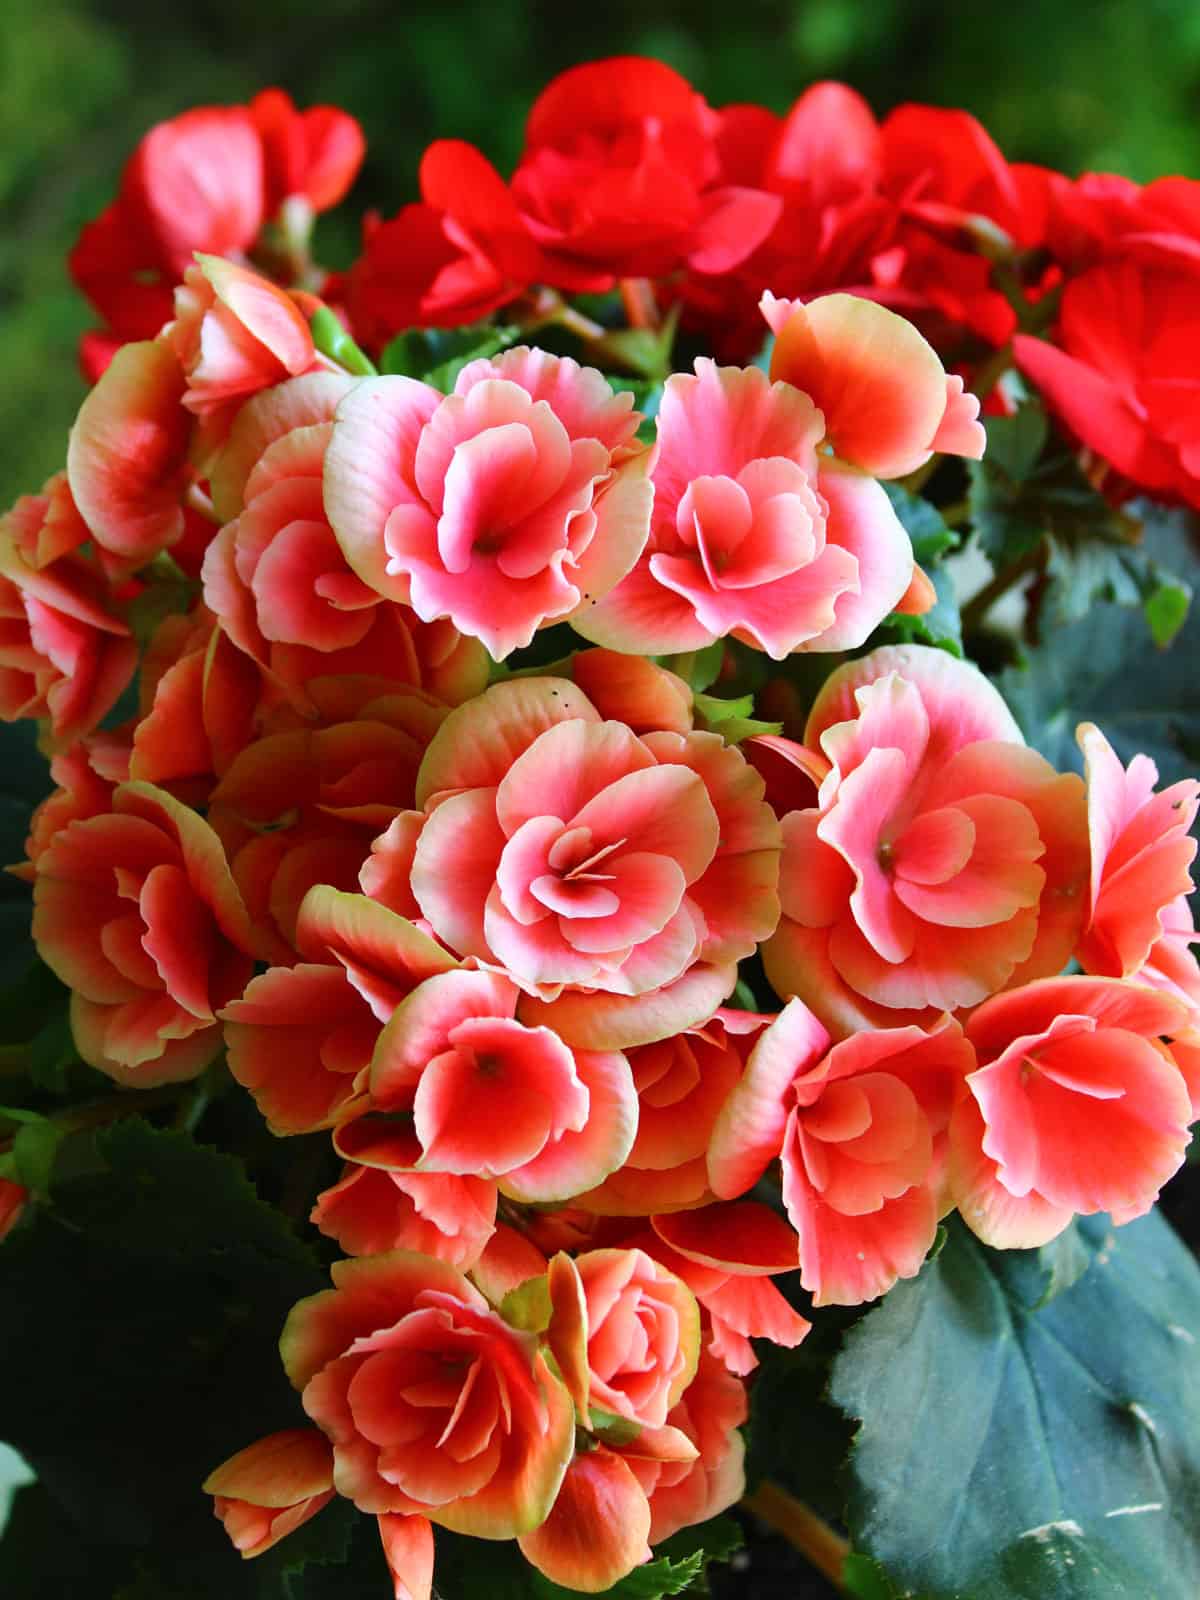 Gorgeous bright red Begonias blooming brightly in the garden